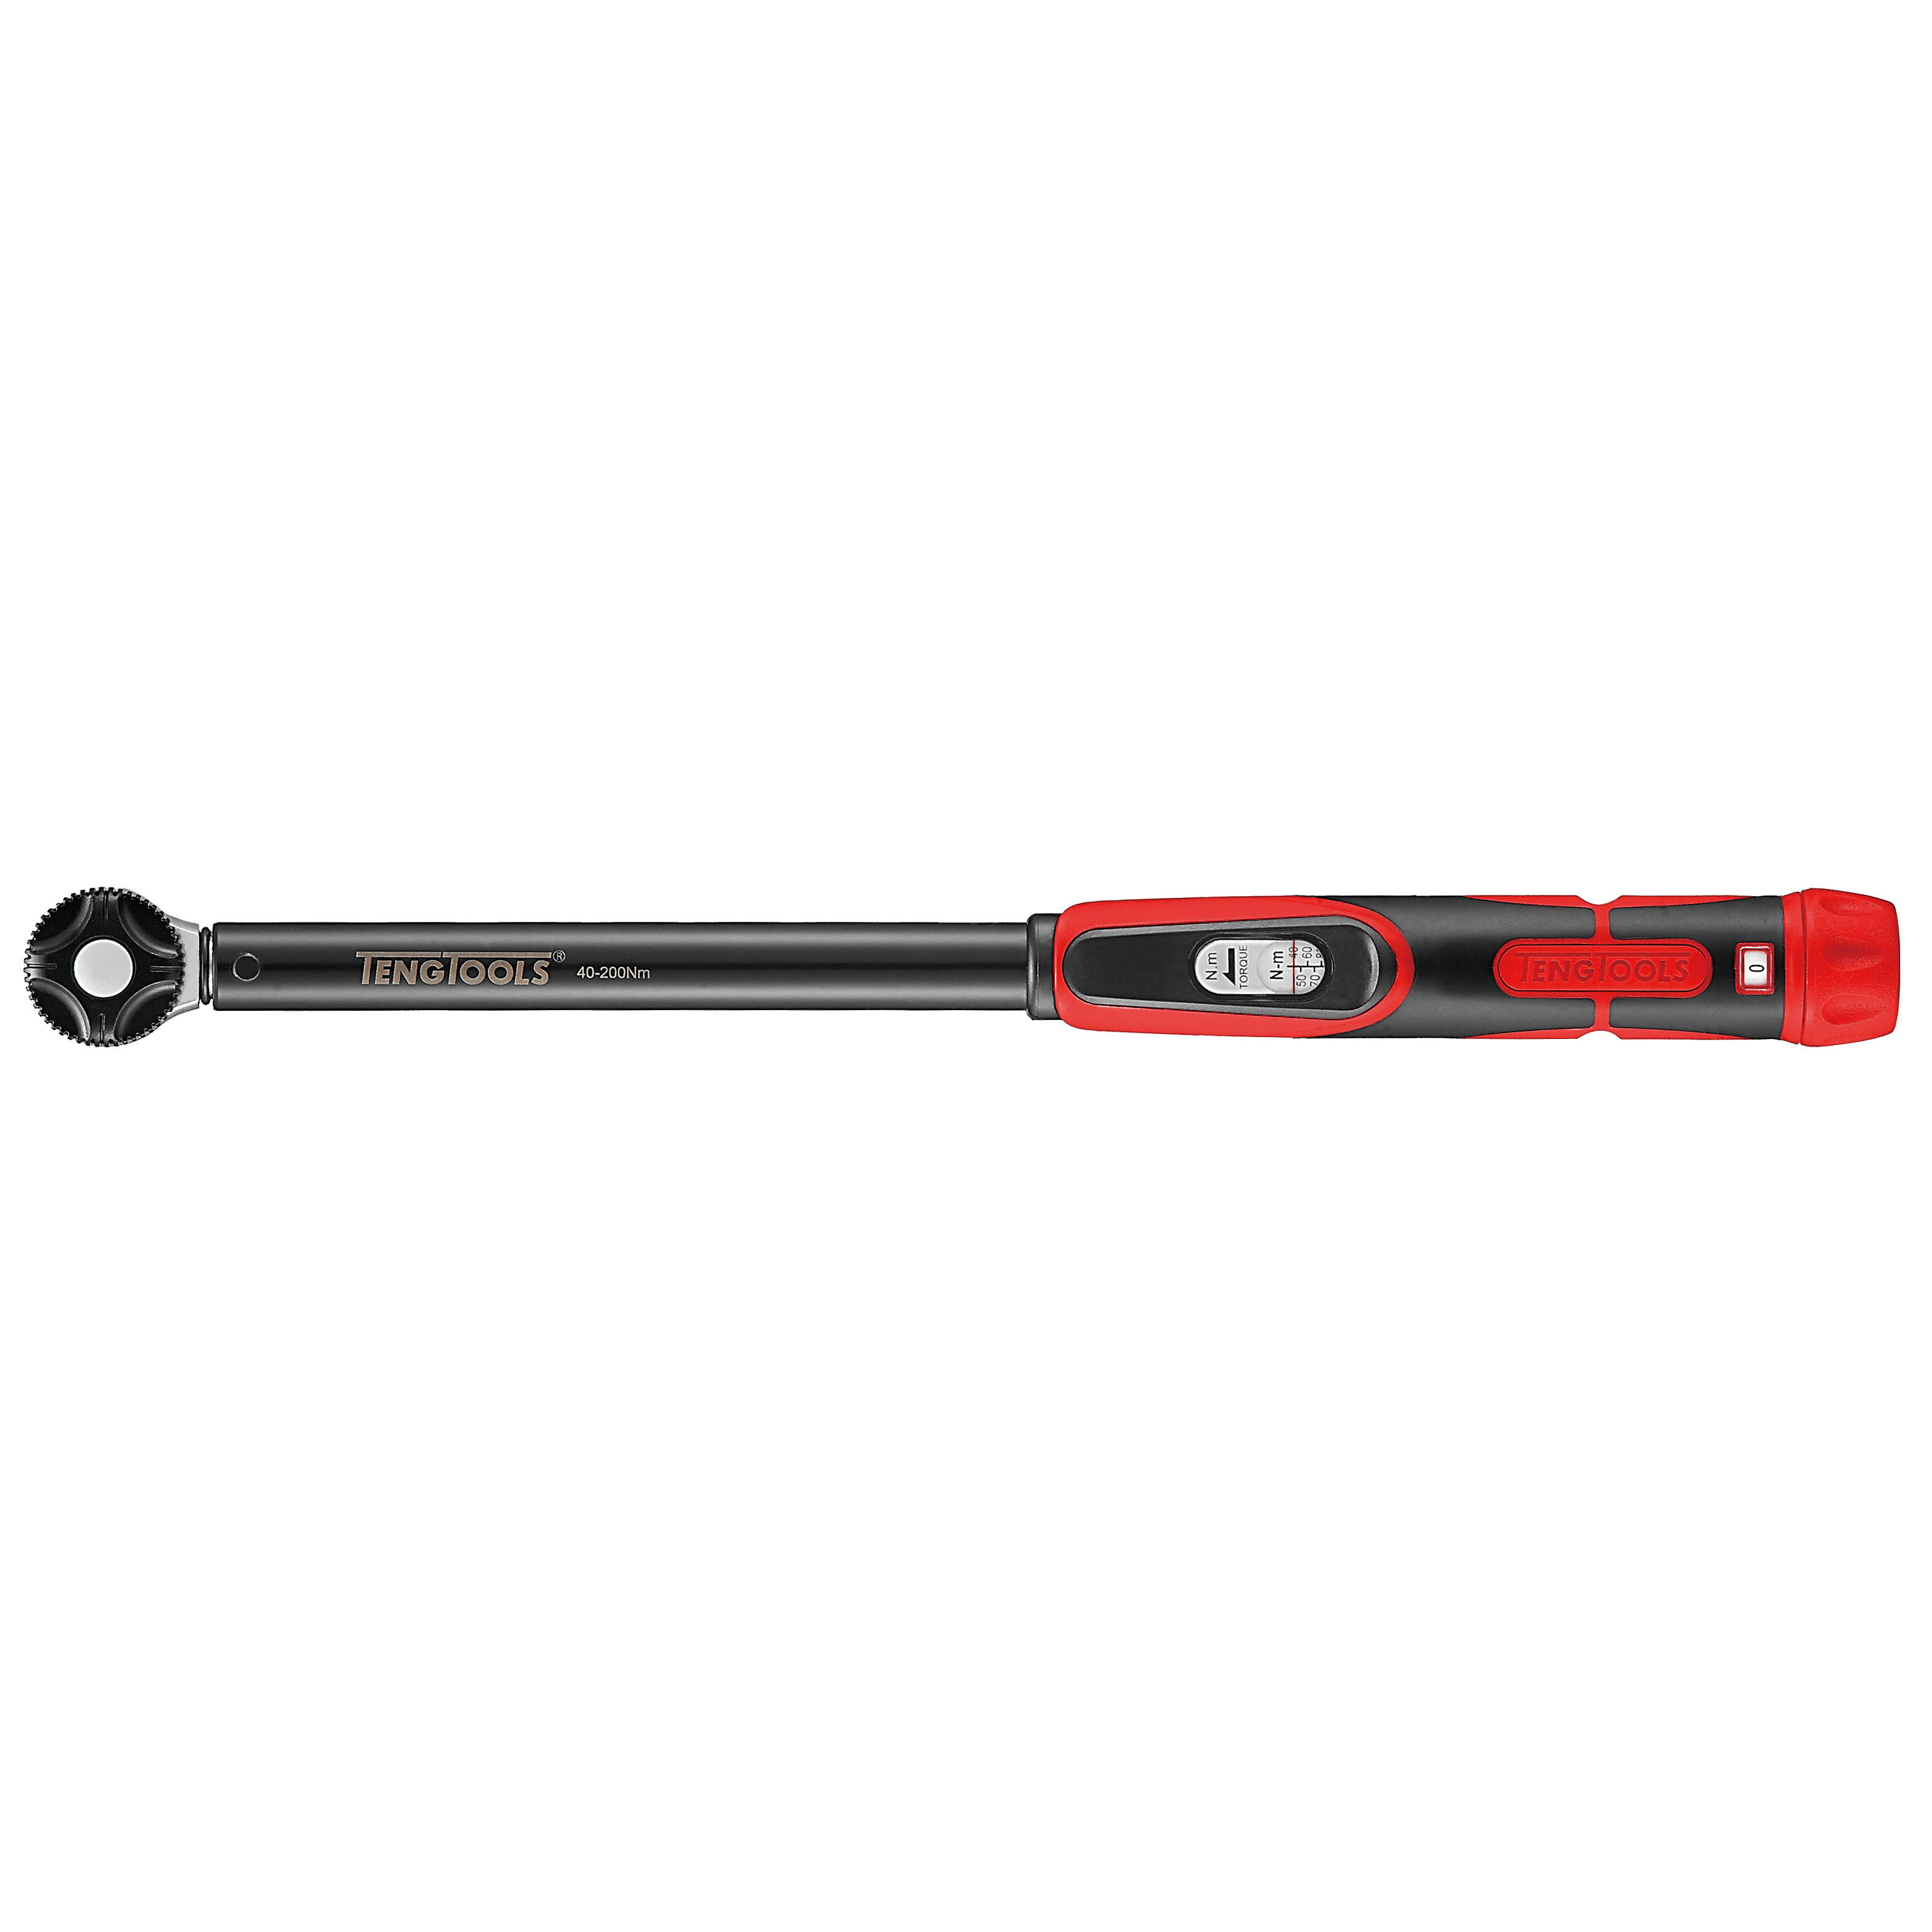 Teng Tools Torque Wrench PLUS - 3/8